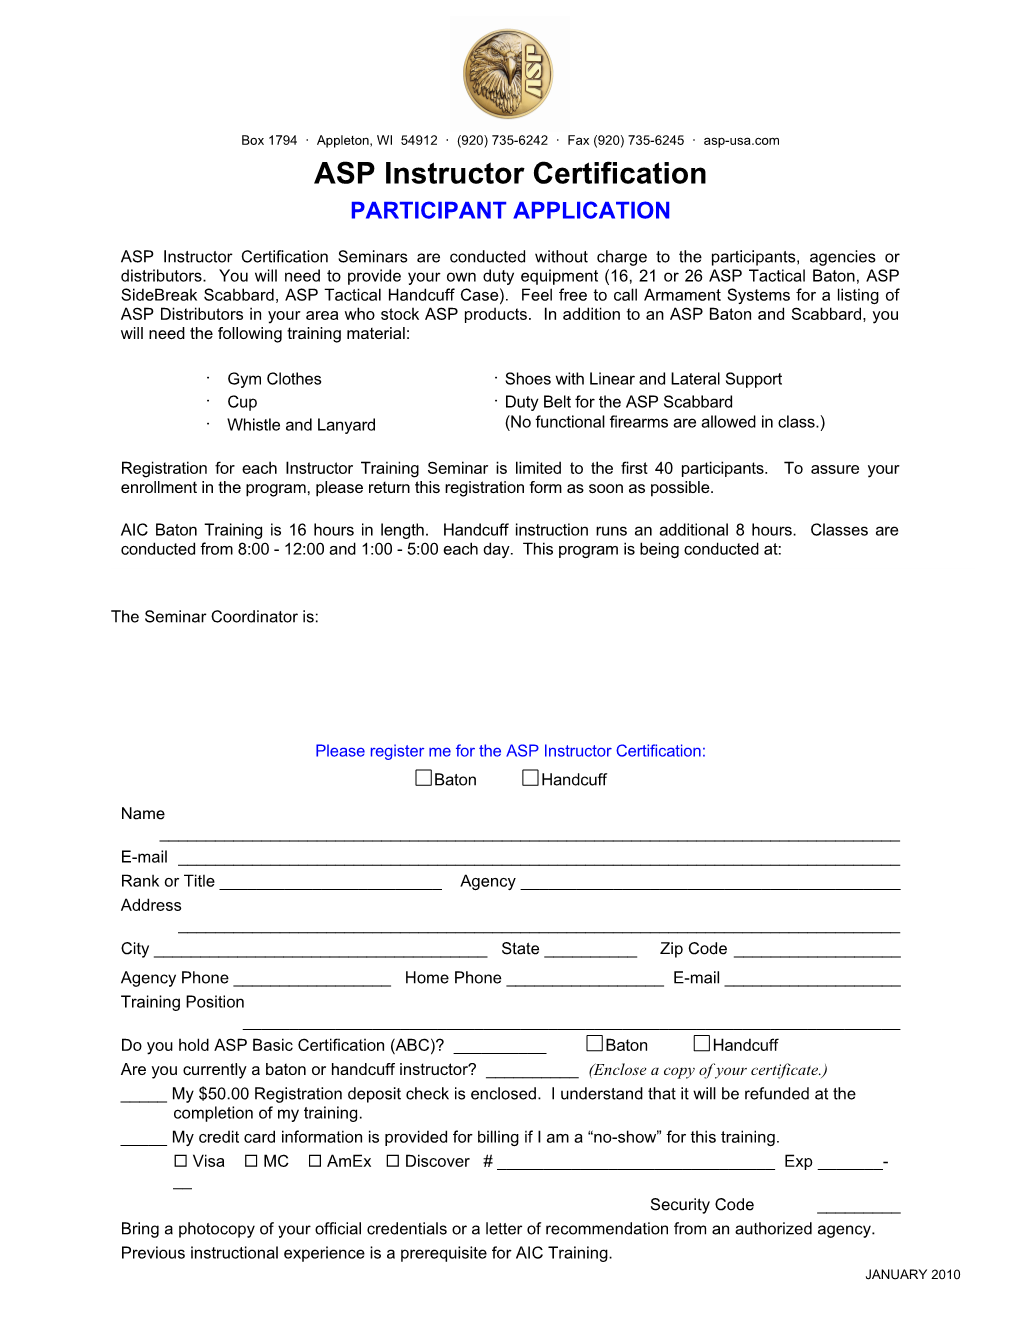 Please Register Me for the ASP Instructor Certification